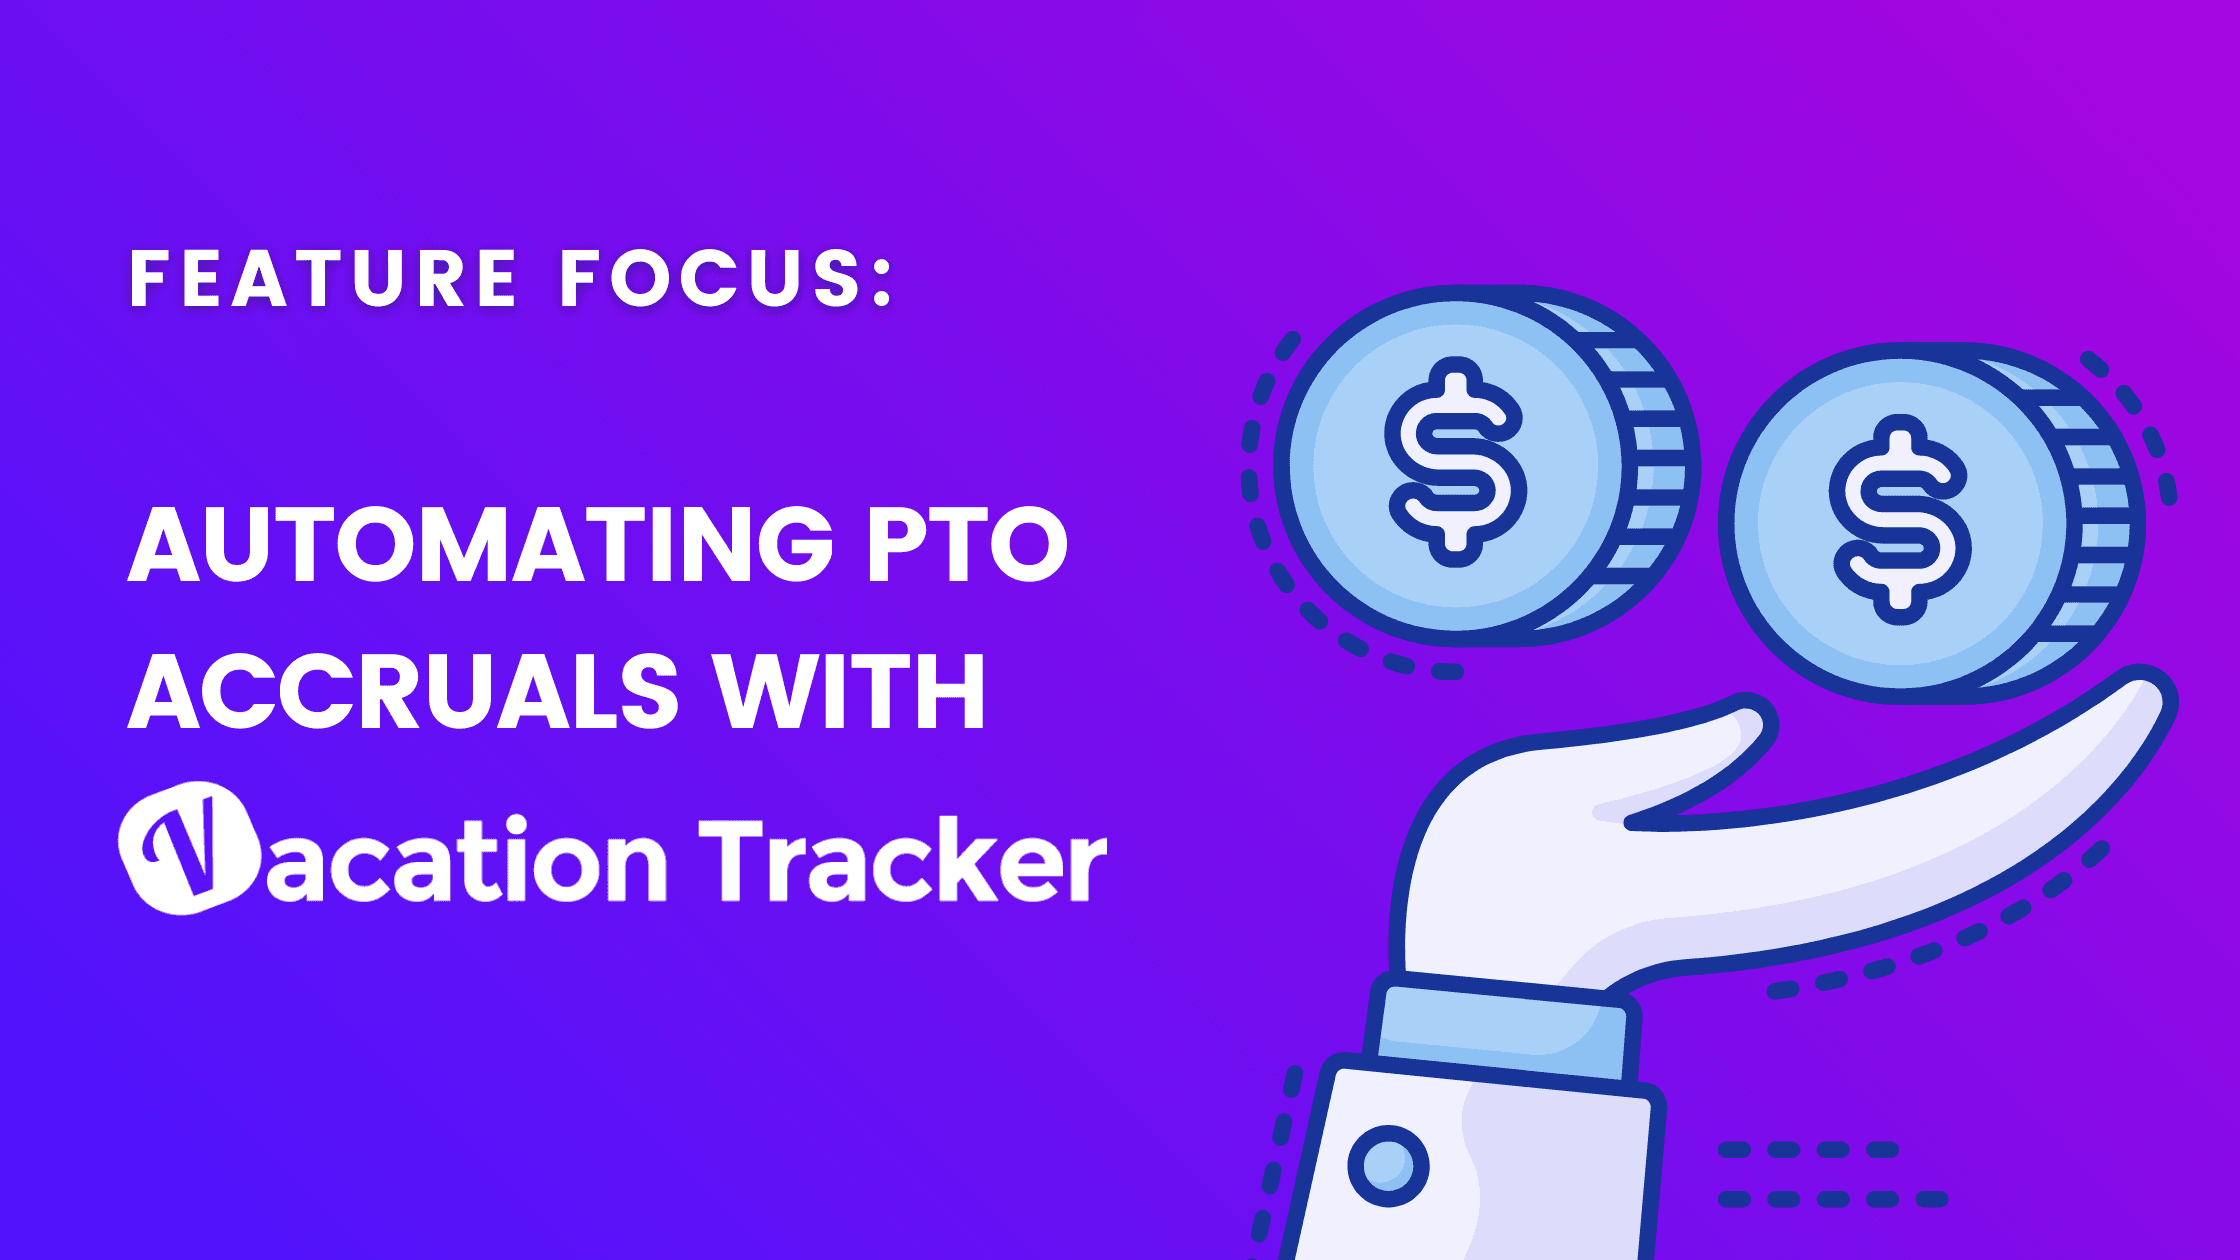 Automating PTO Accruals with Vacation Tracker